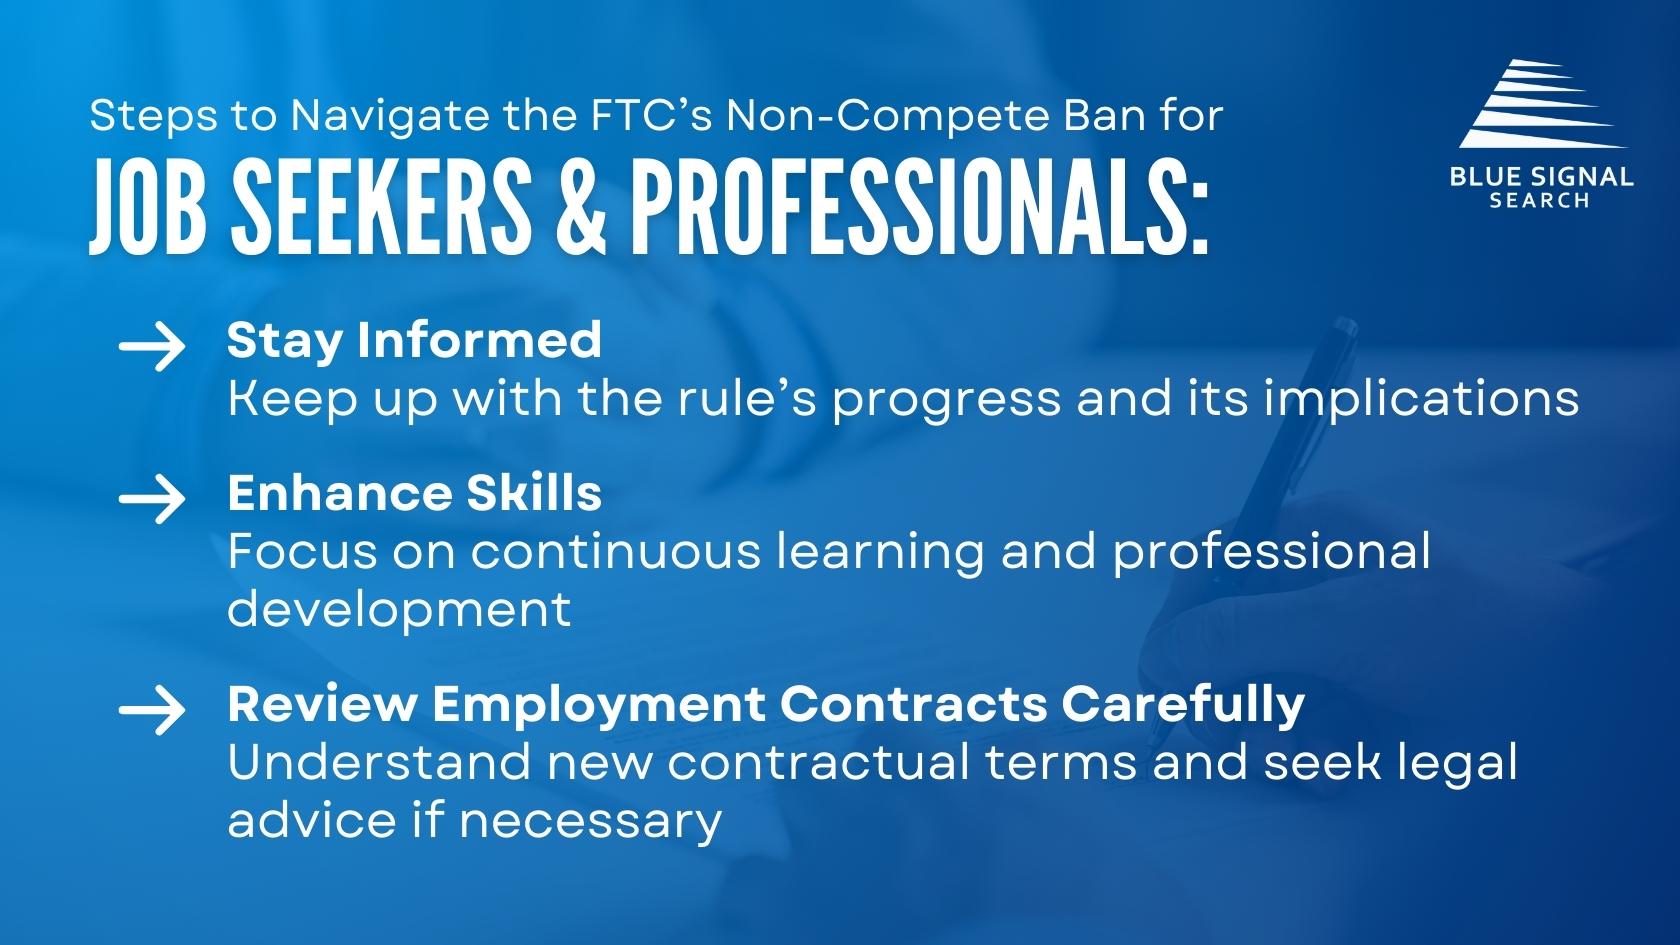 Steps for Job Seekers to Navigate the FTC’s Non-Compete Ban